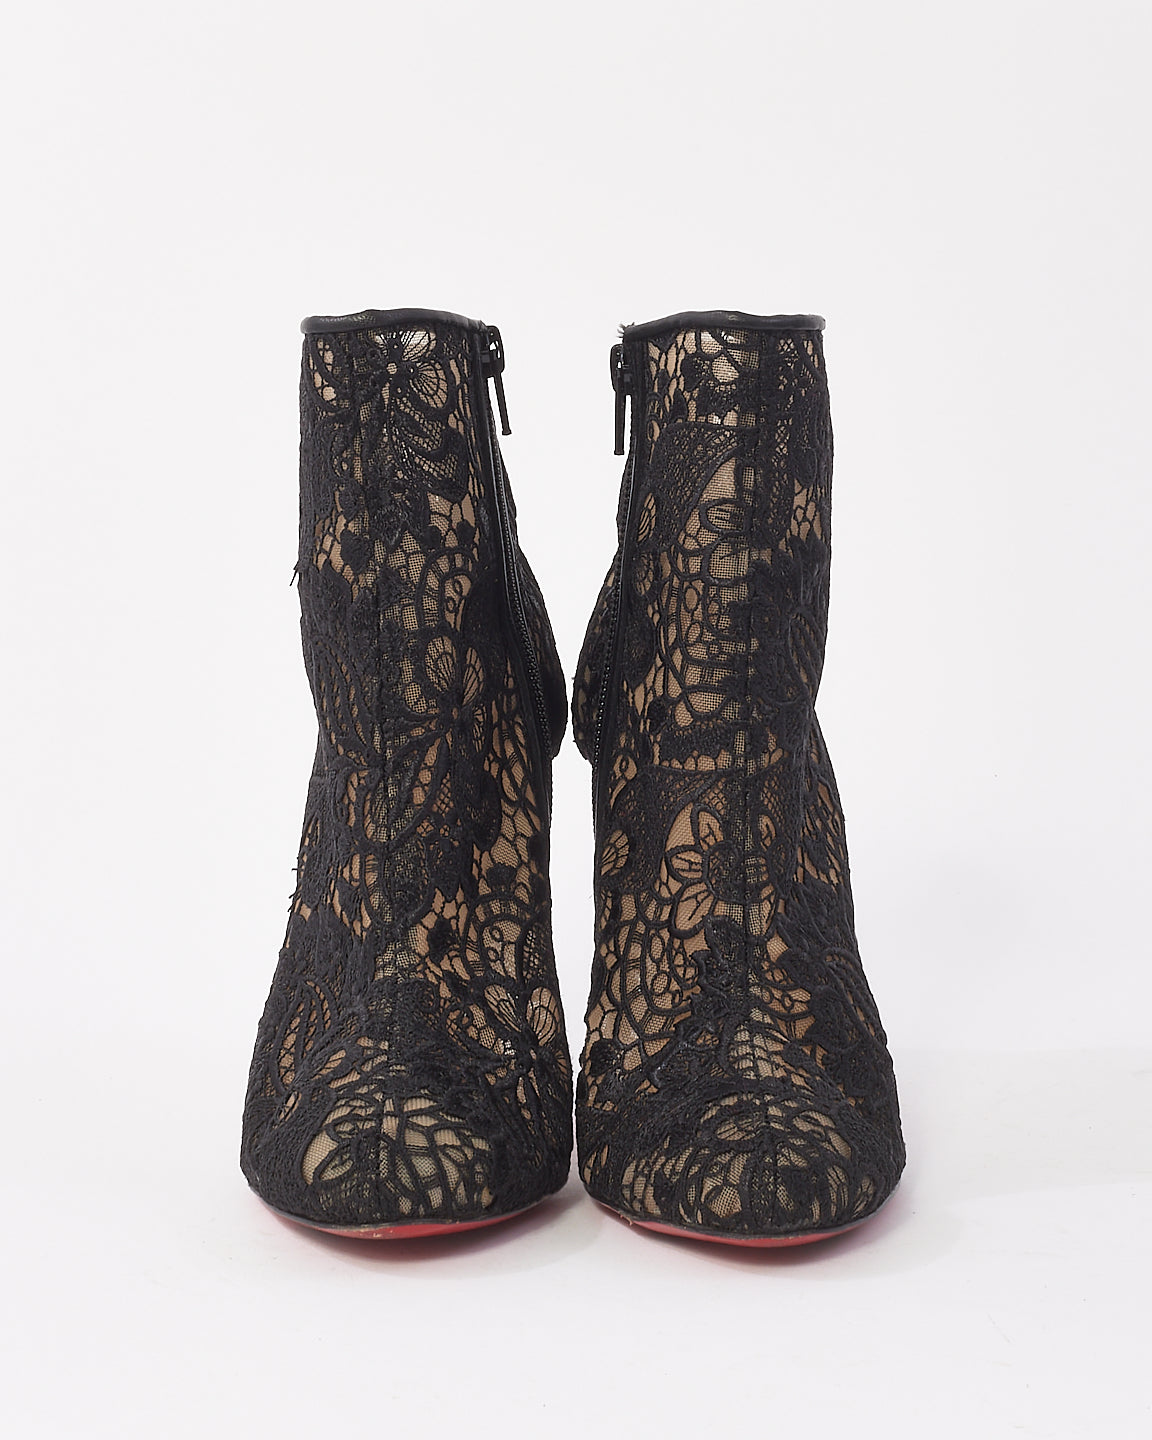 Christian Louboutin Black Lace Miss Tennis Ankle Boots - 37.5